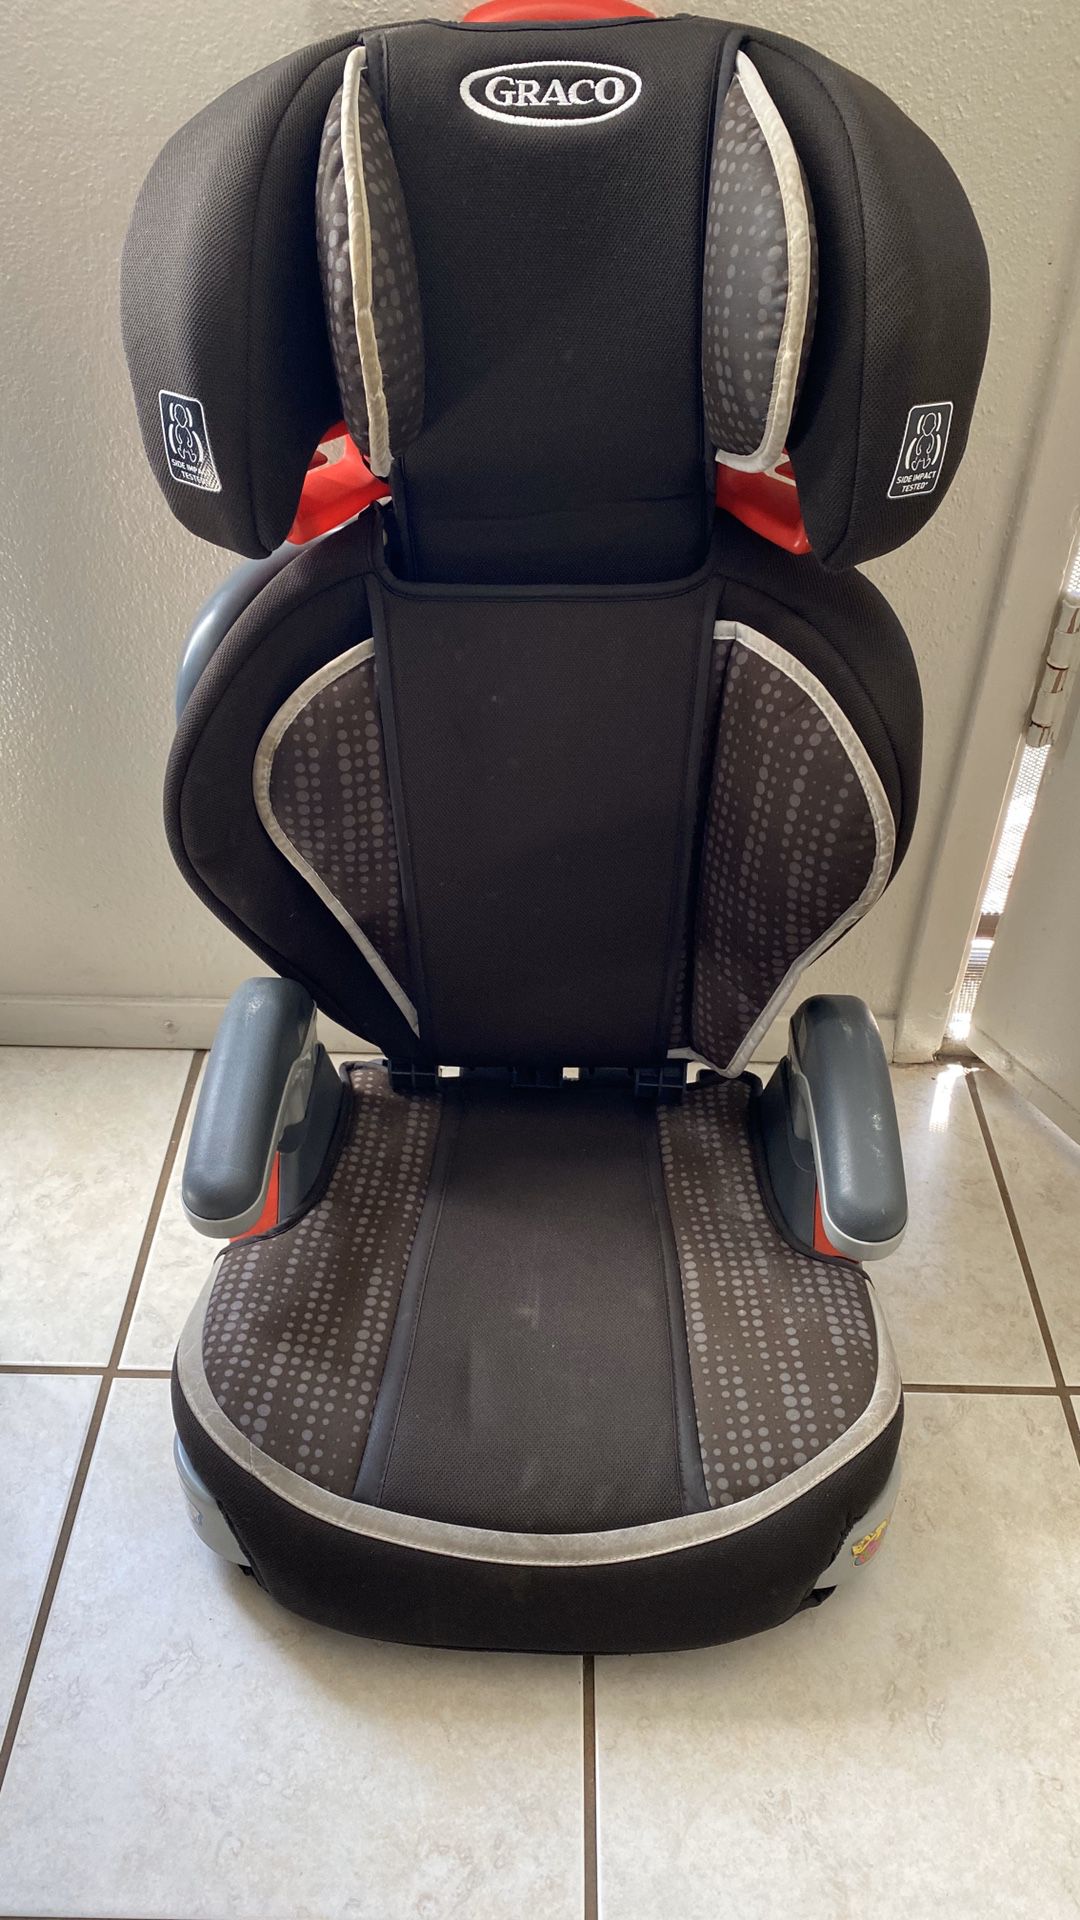 Booster car seat Graco